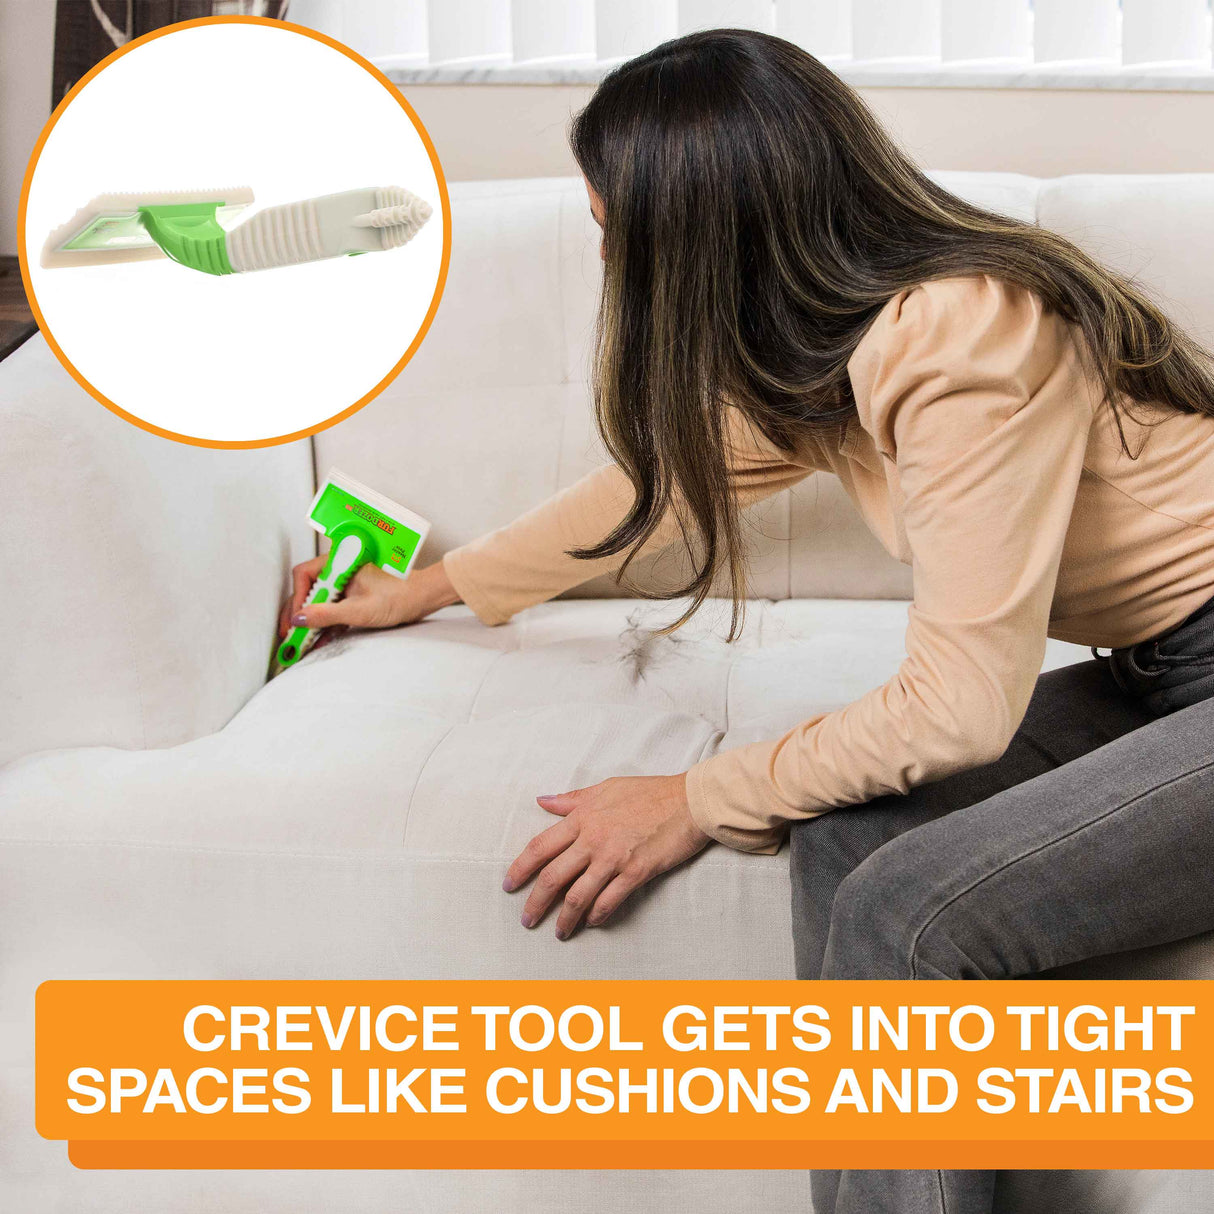 Crevice tool gets into tight spaces